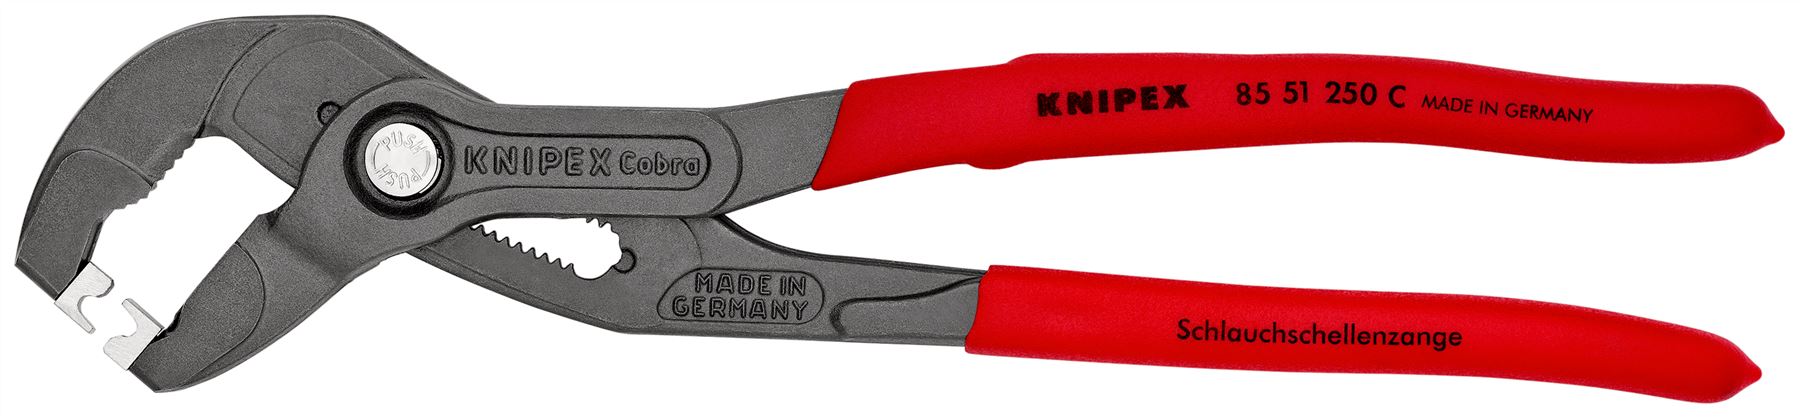 Knipex Hose Clamp Pliers for Click Clamps 250mm 85 51 250 C